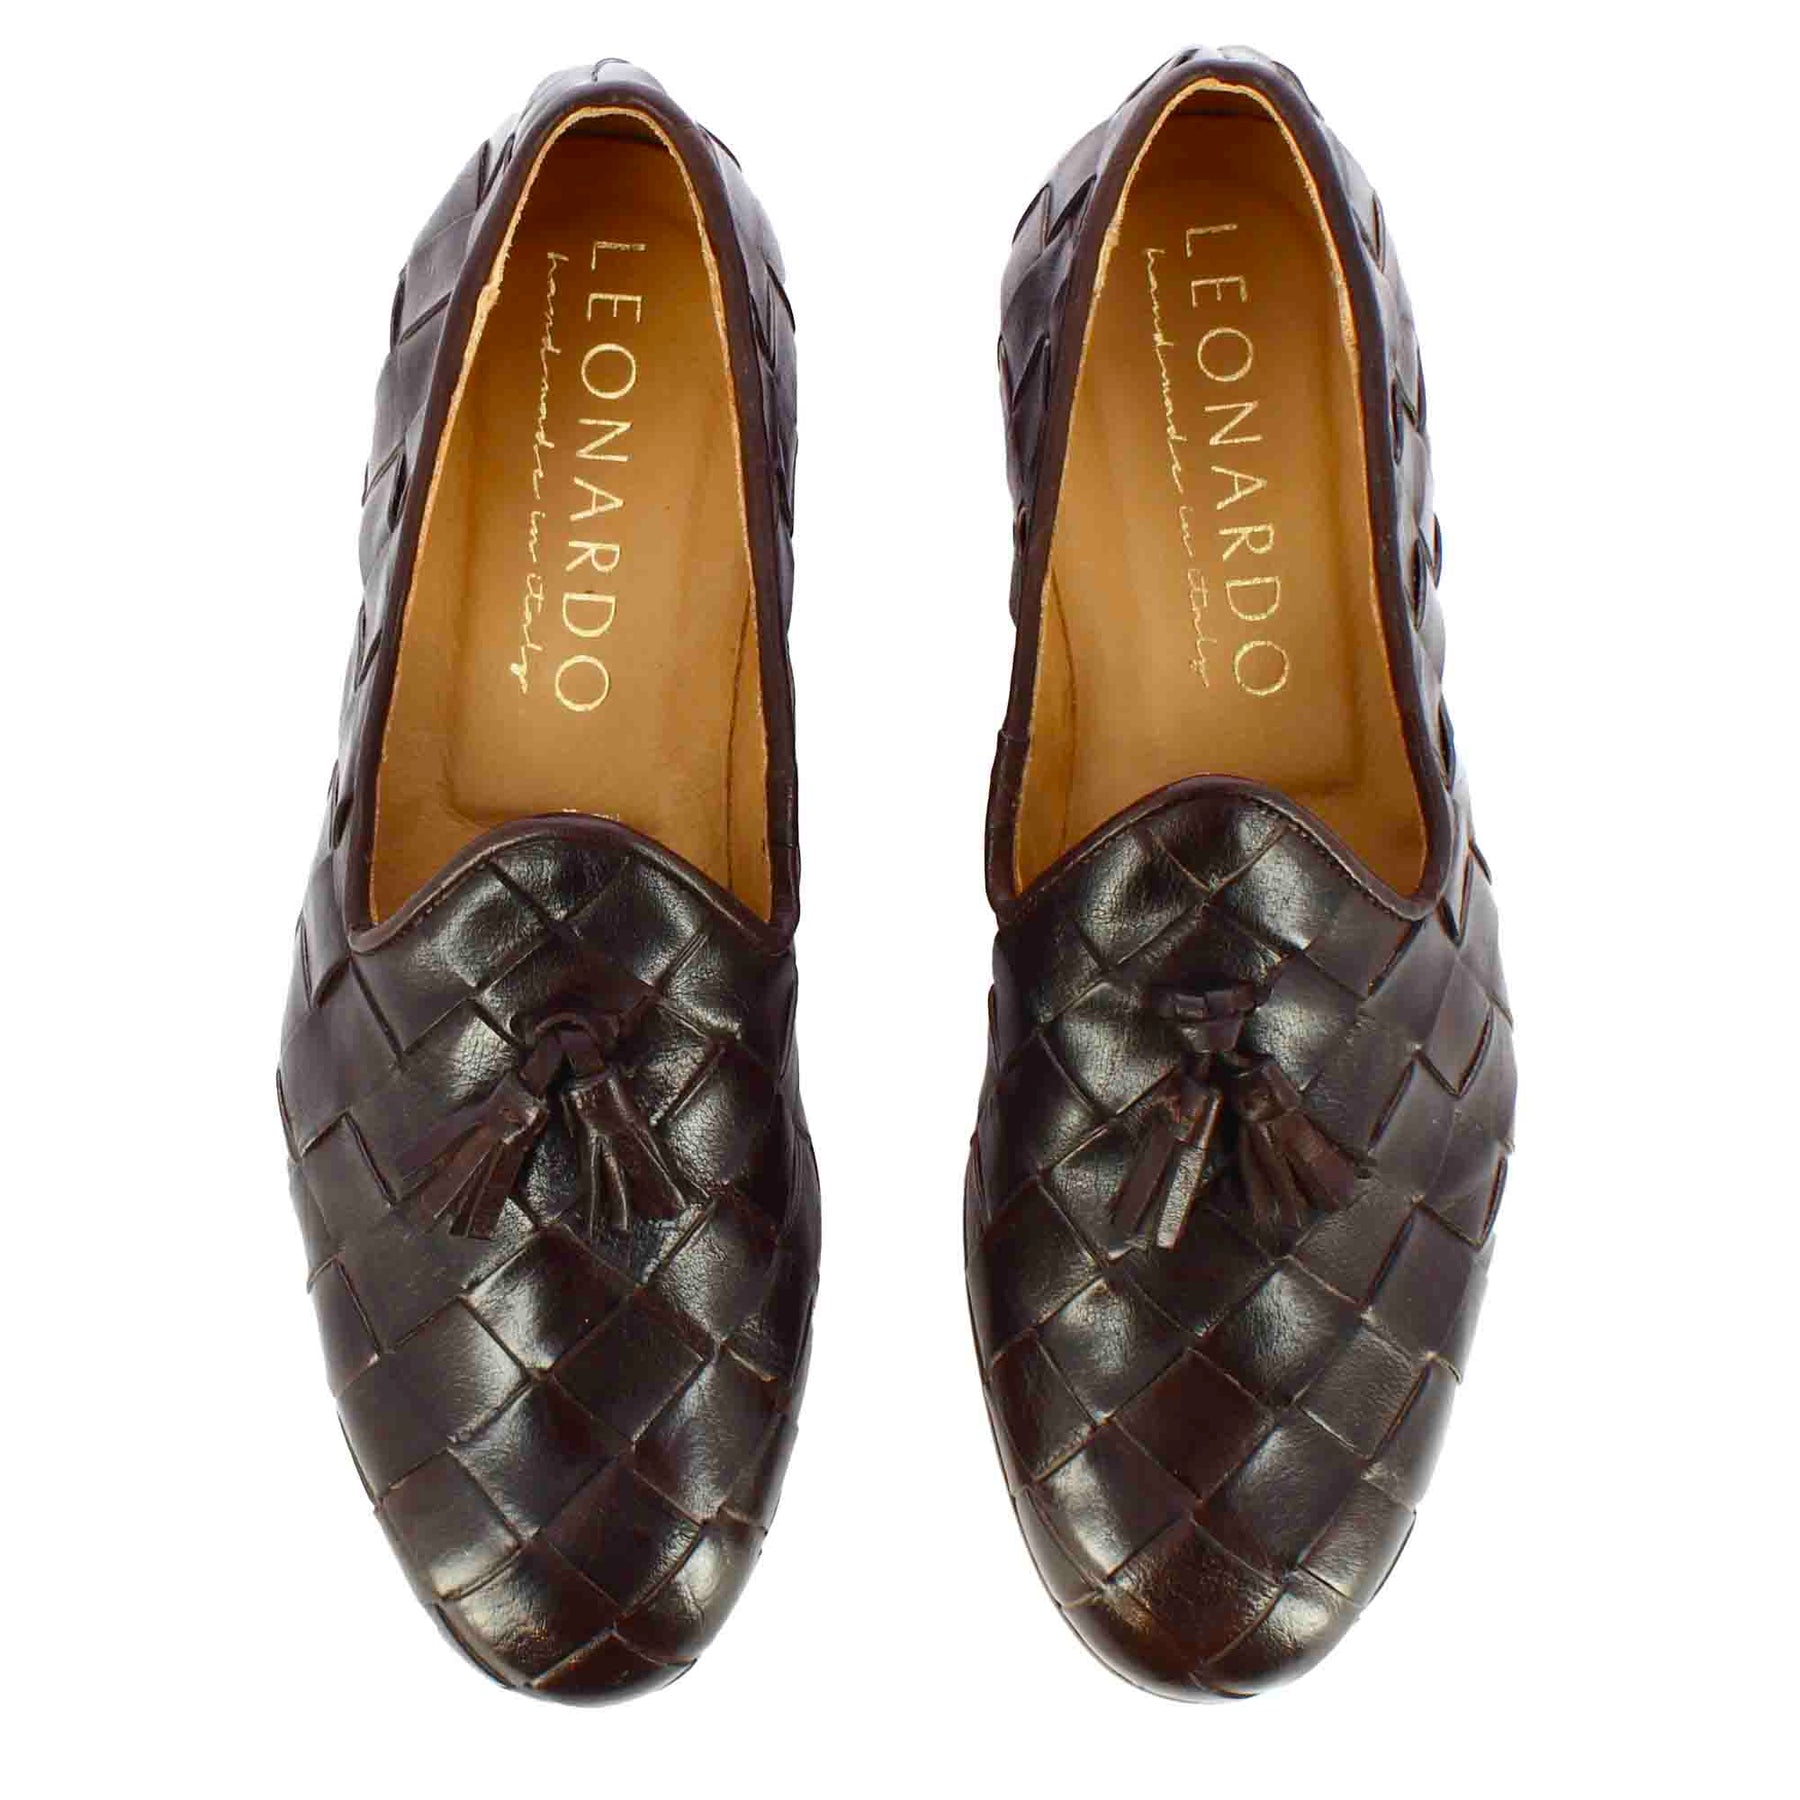 Men's loafers with tassels in dark brown woven leather